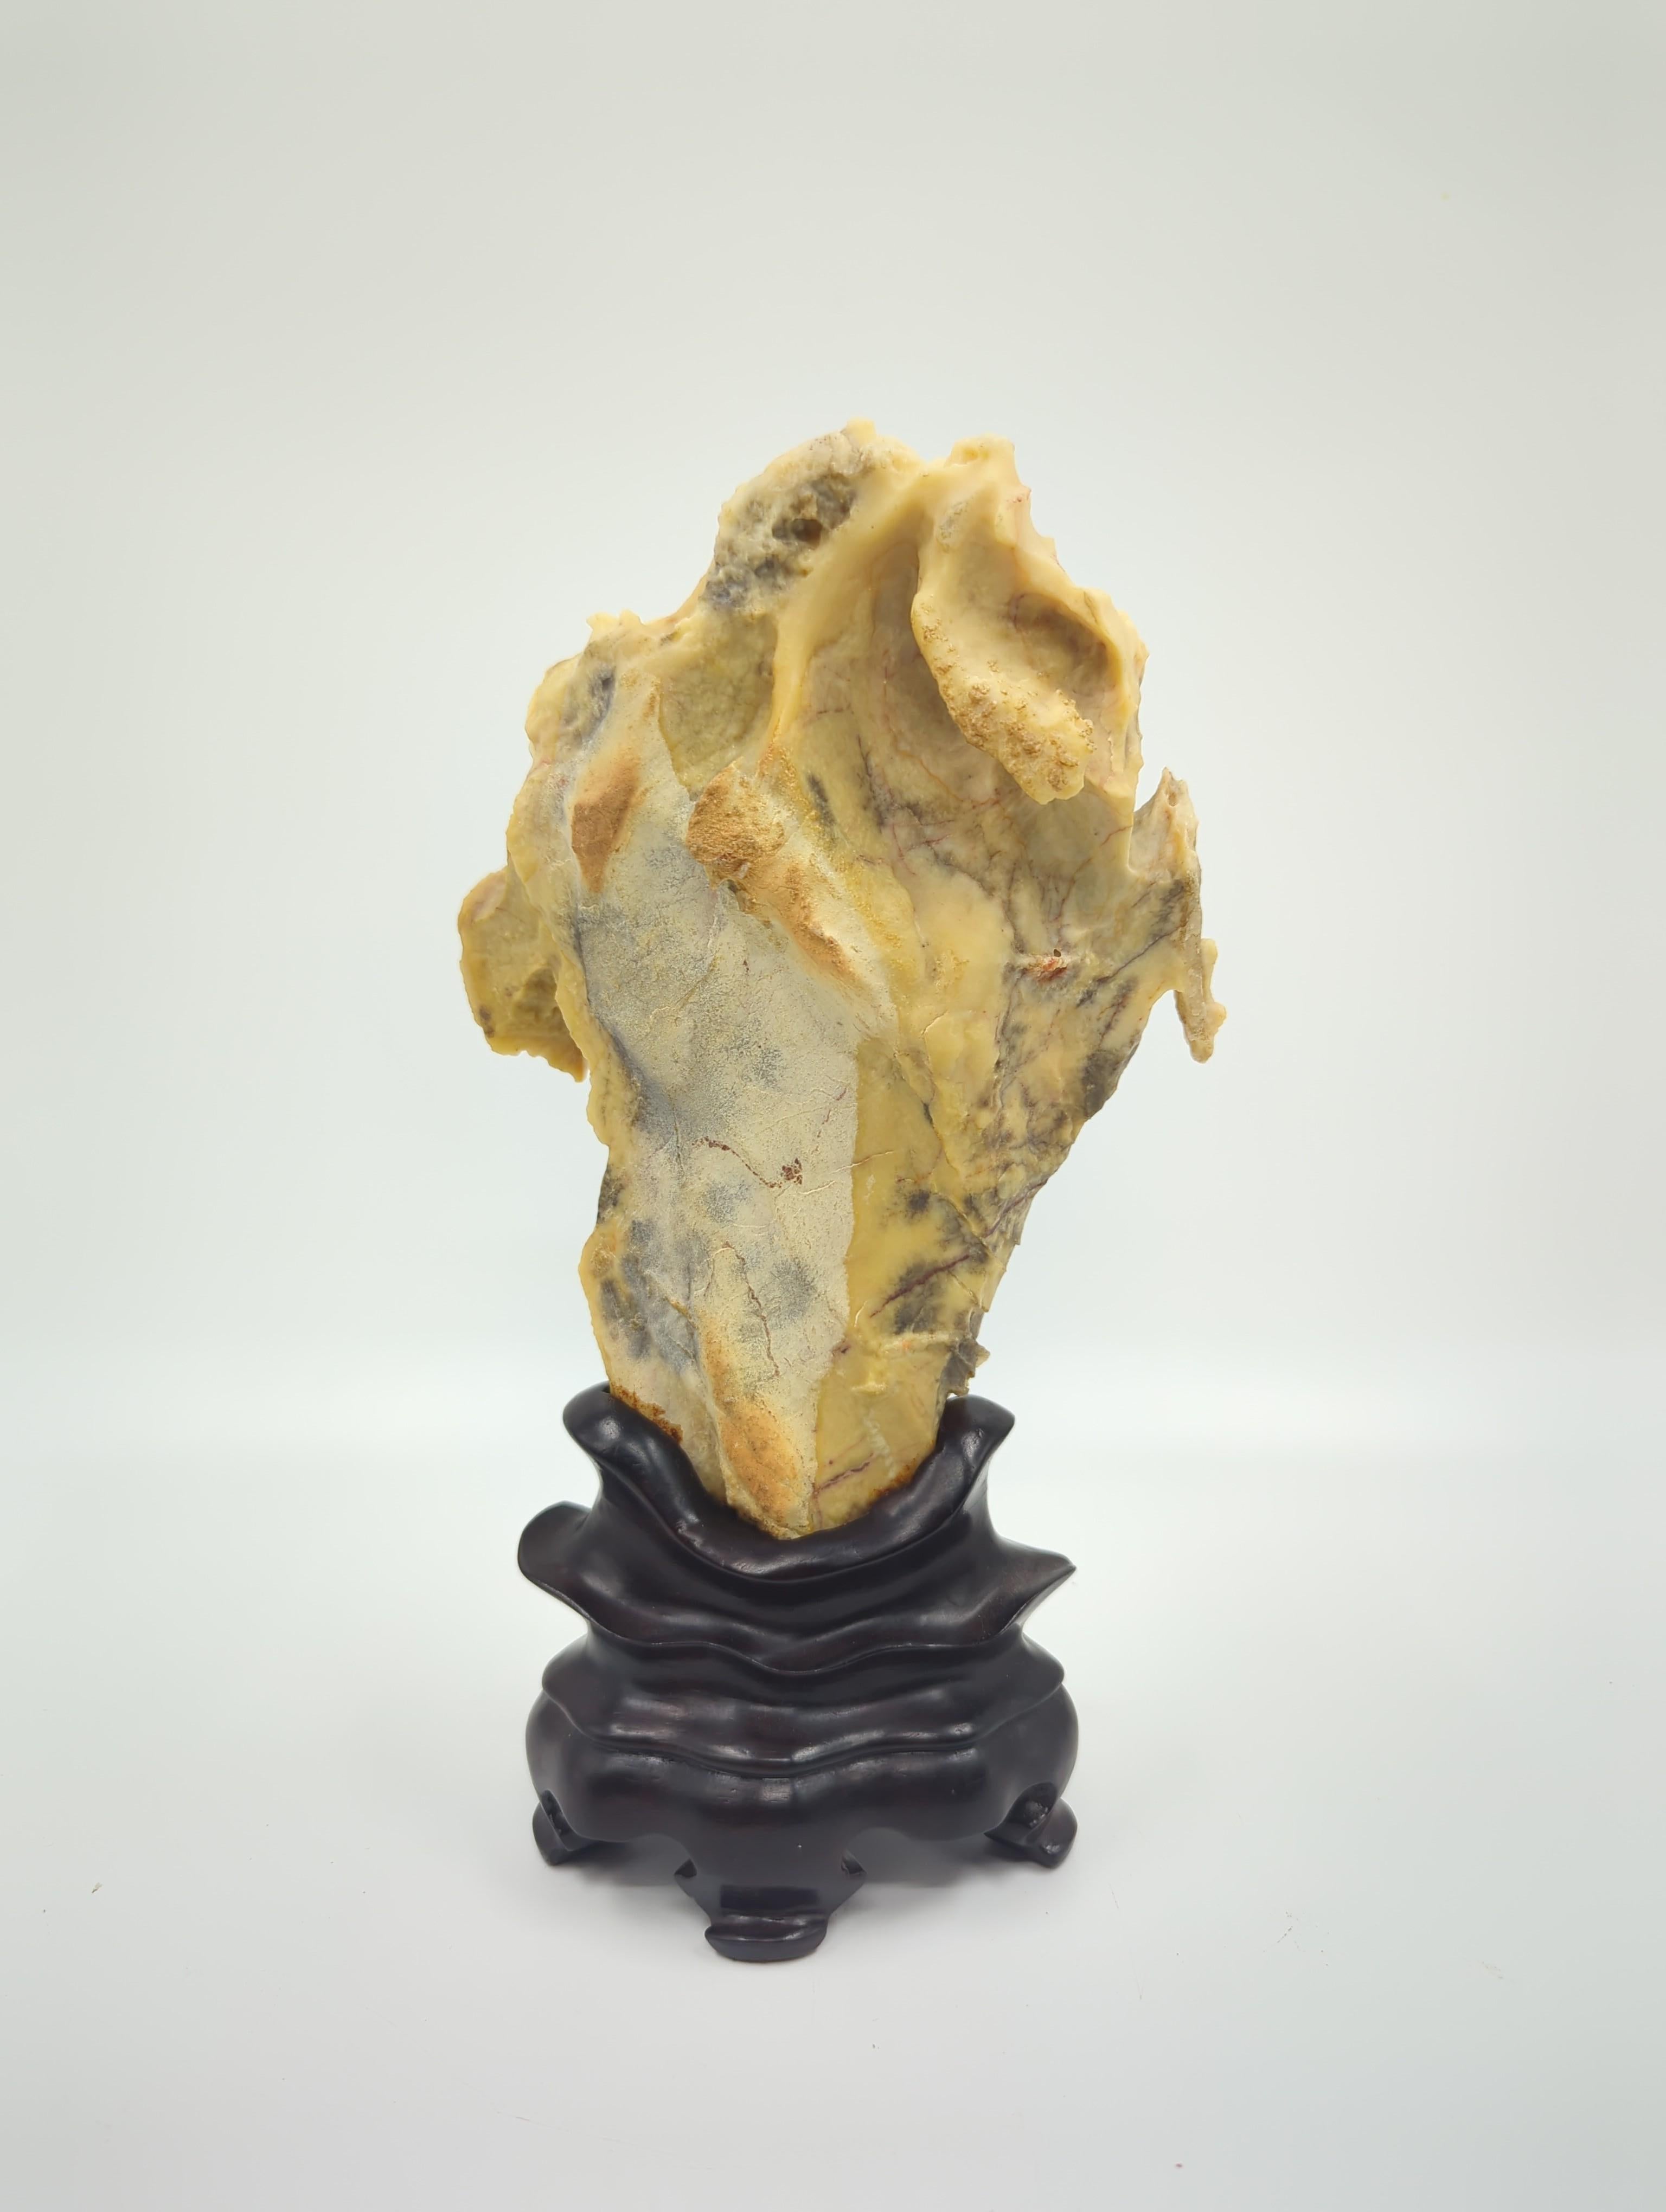 This rare Chinese Gongshi, or scholar's stone, is a remarkable and highly auspicious item, celebrated not only for its natural beauty but also for its cultural significance. Featuring a striking combination of yellow and white, the stone bears a